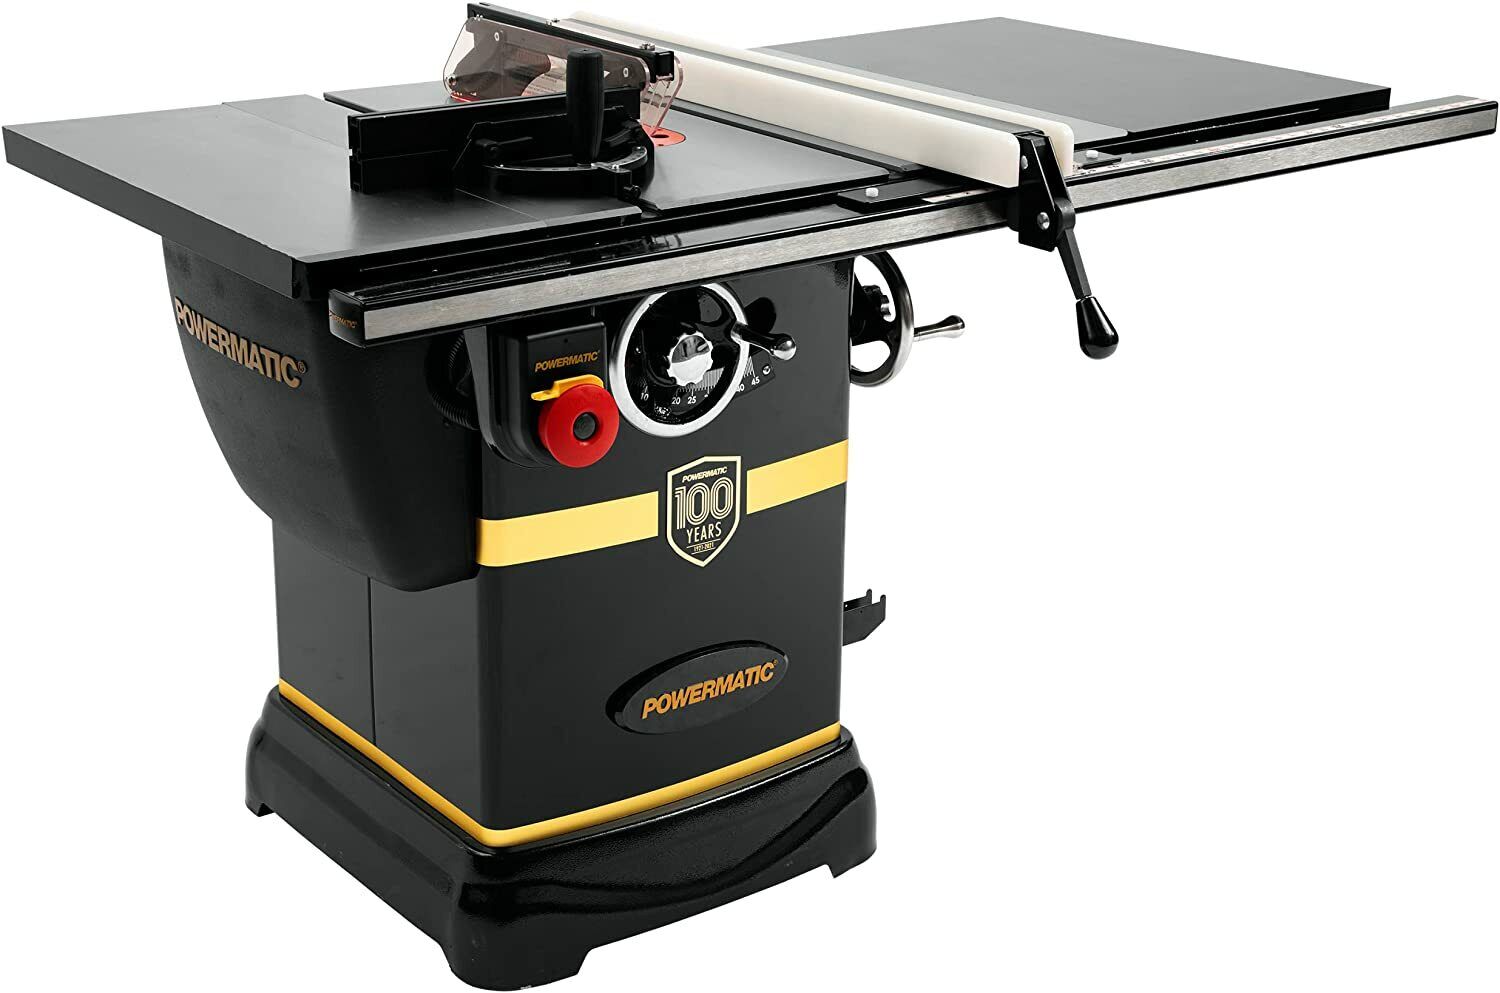 Powermatic Pm1000, Table Saw, 30" Accu-fence System 100 Year Limited Edition